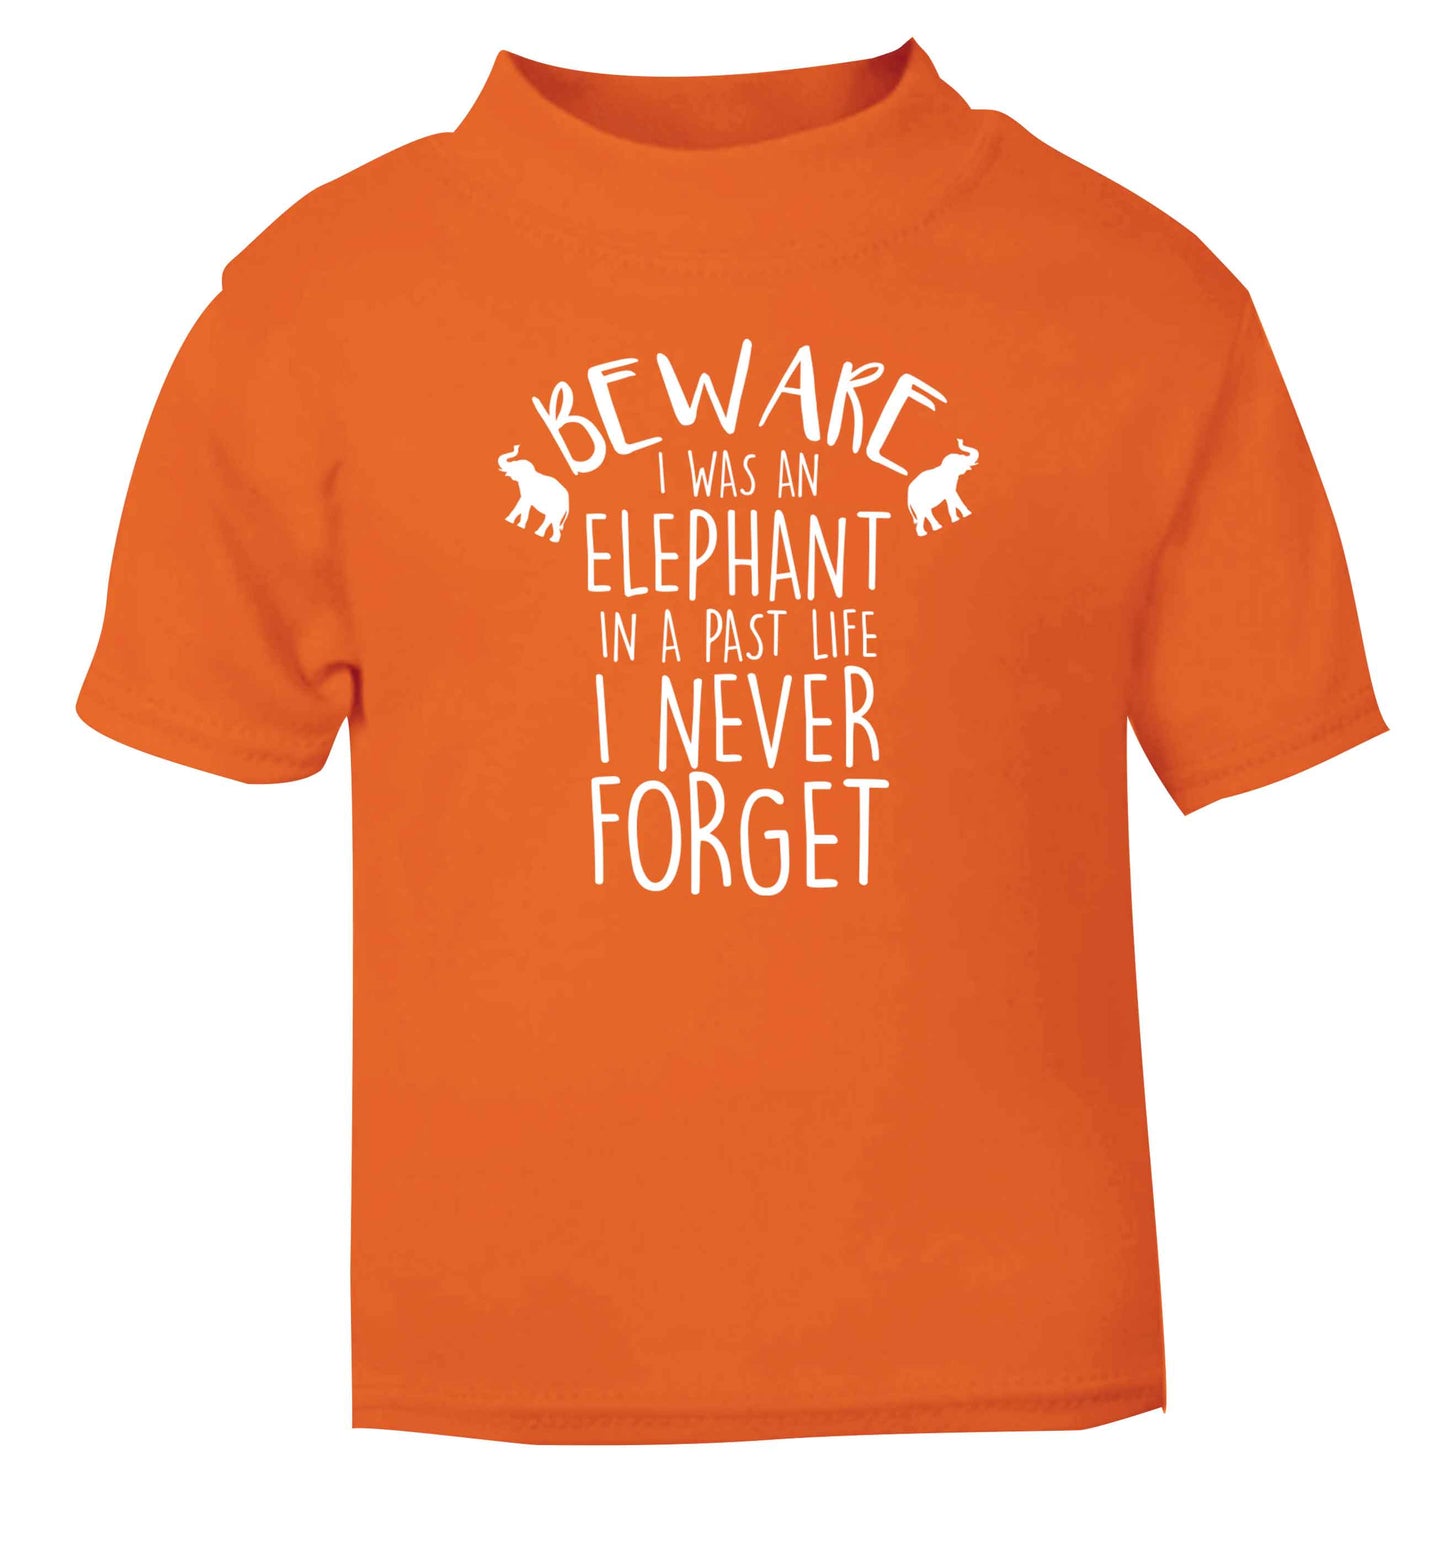 Beware I was an elephant in my past life I never forget orange Baby Toddler Tshirt 2 Years